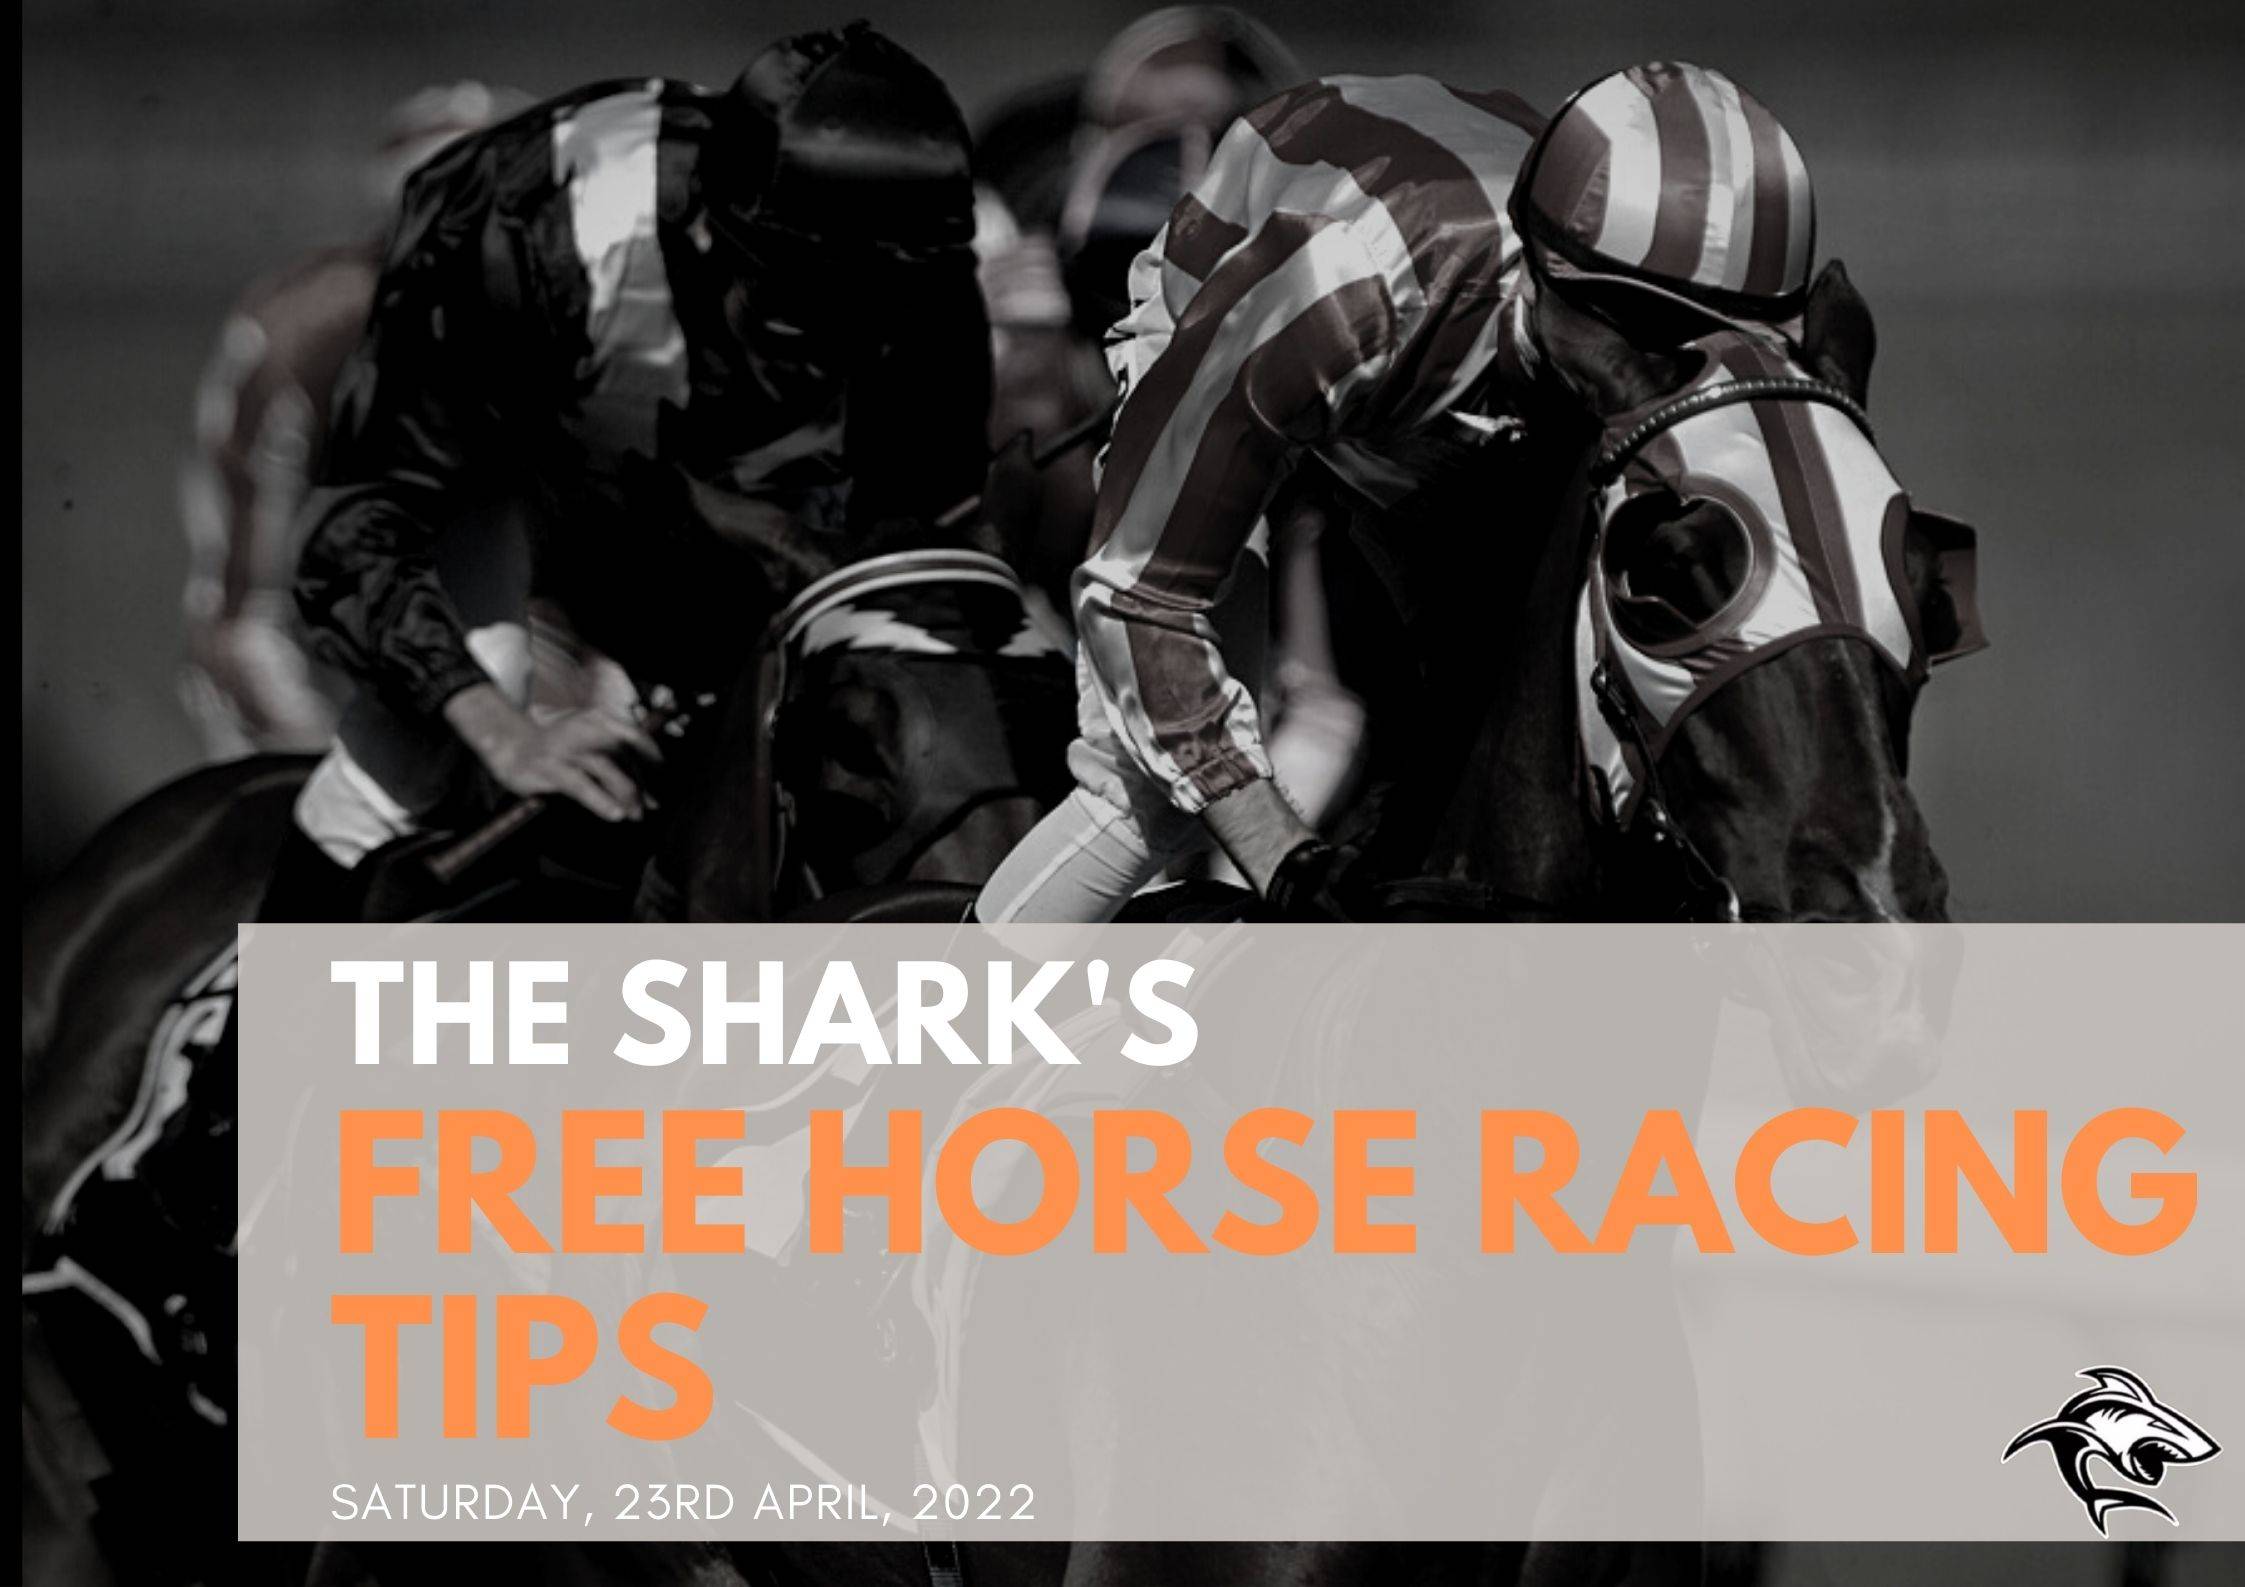 Free Horse Racing Tips - 23rd Apr